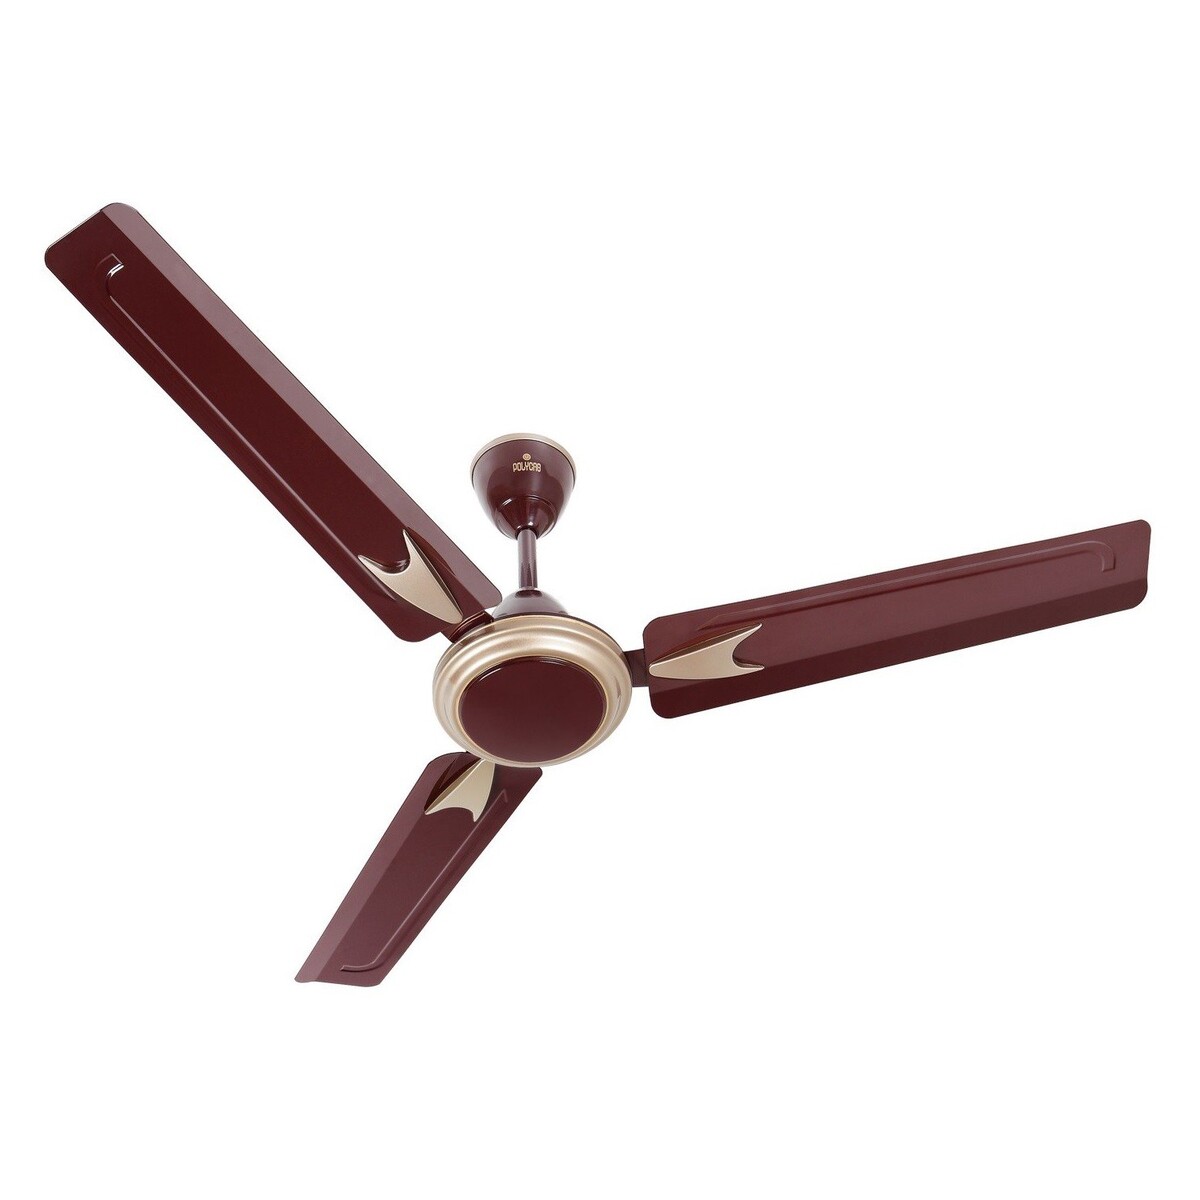 Polycab Ceiling Fan Viva DLX Luster Brown